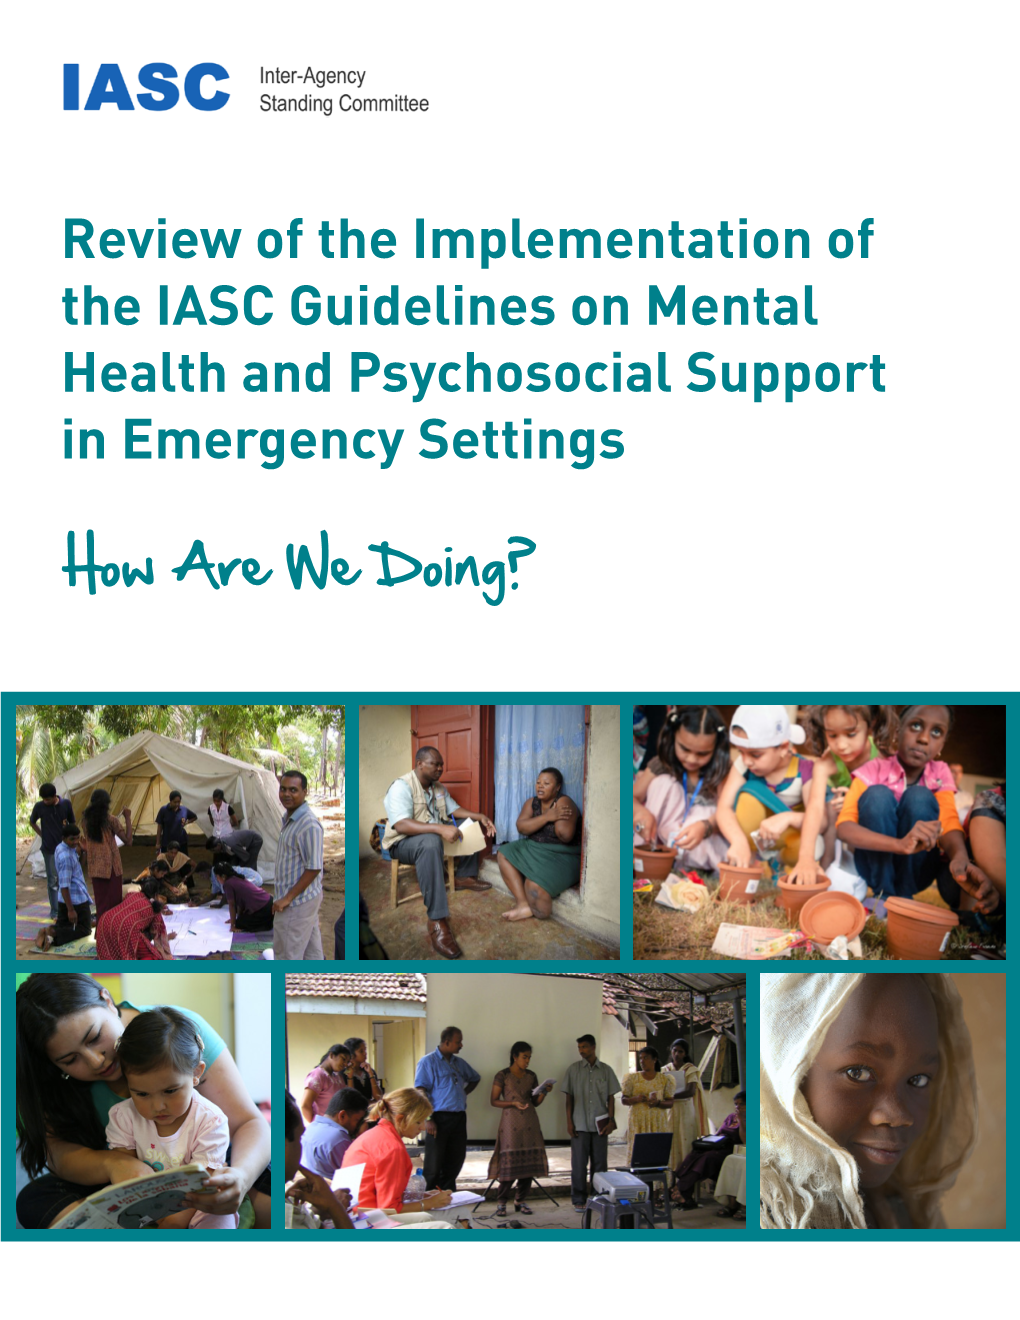 Review of the Implementation of the IASC Guidelines on Mental Health and Psychosocial Support in Emergency Settings